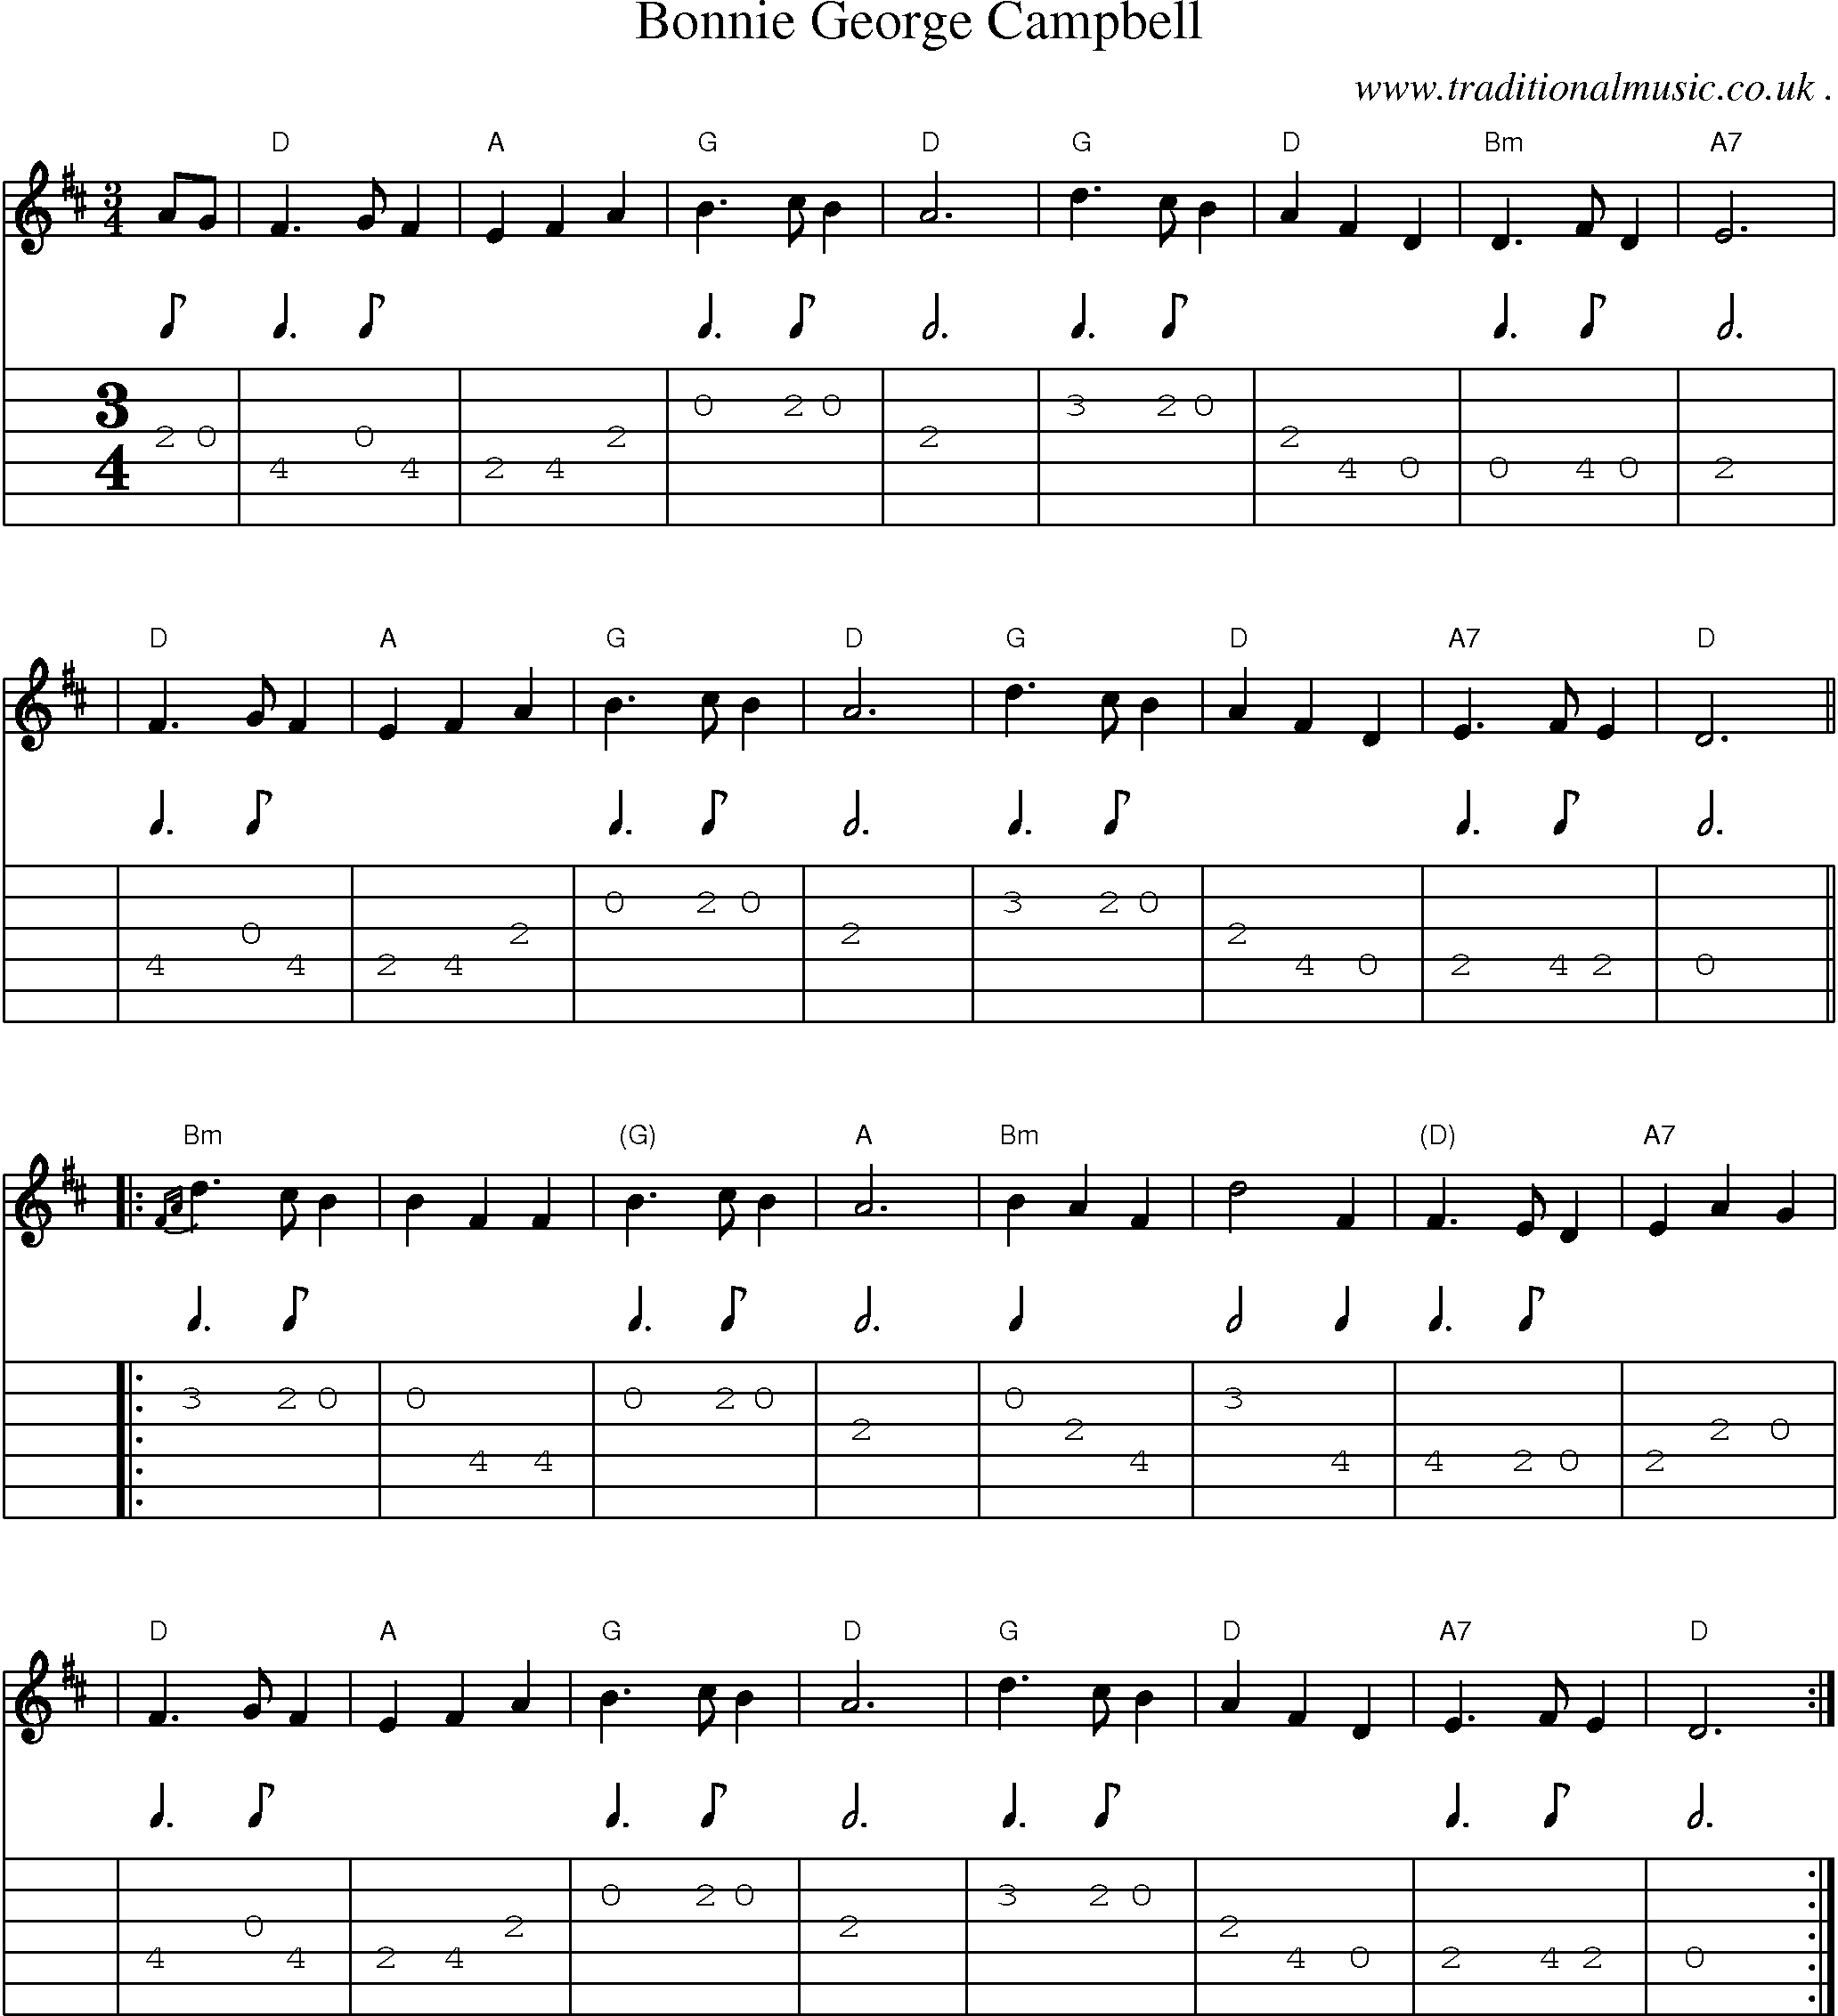 Sheet-music  score, Chords and Guitar Tabs for Bonnie George Campbell